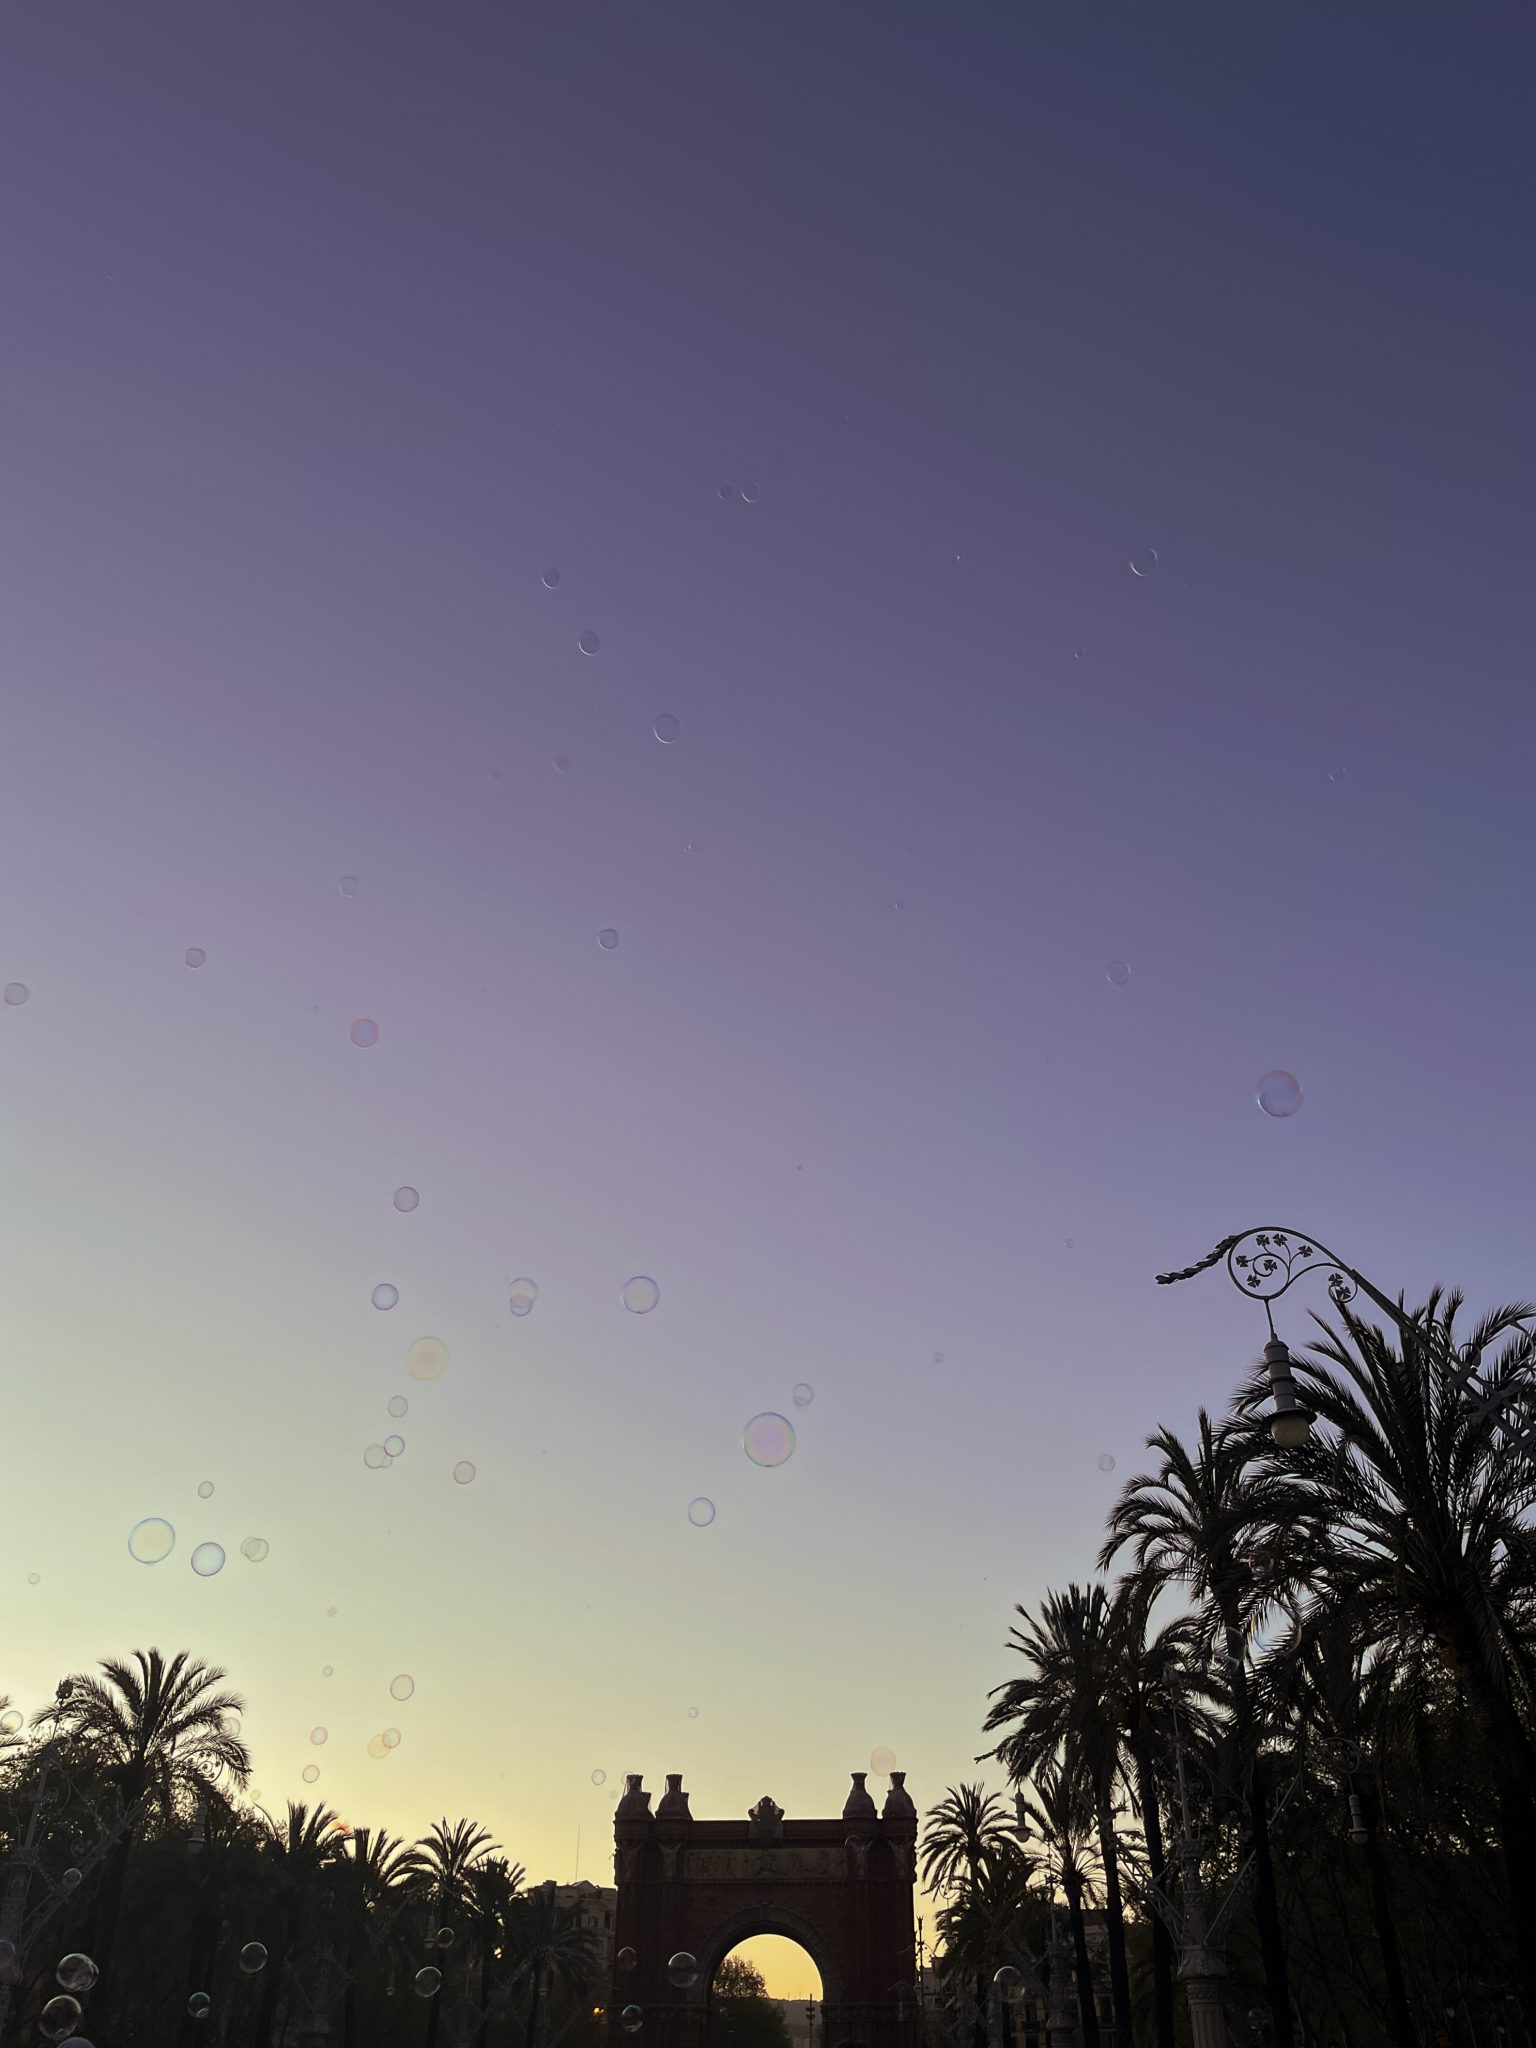 Sunset sky, full of soap bubbles, taken from Passeig de Lluís Companys, in Barcelona (Spain). At the bottom, the Arc de Triomf and palm trees backlighted.